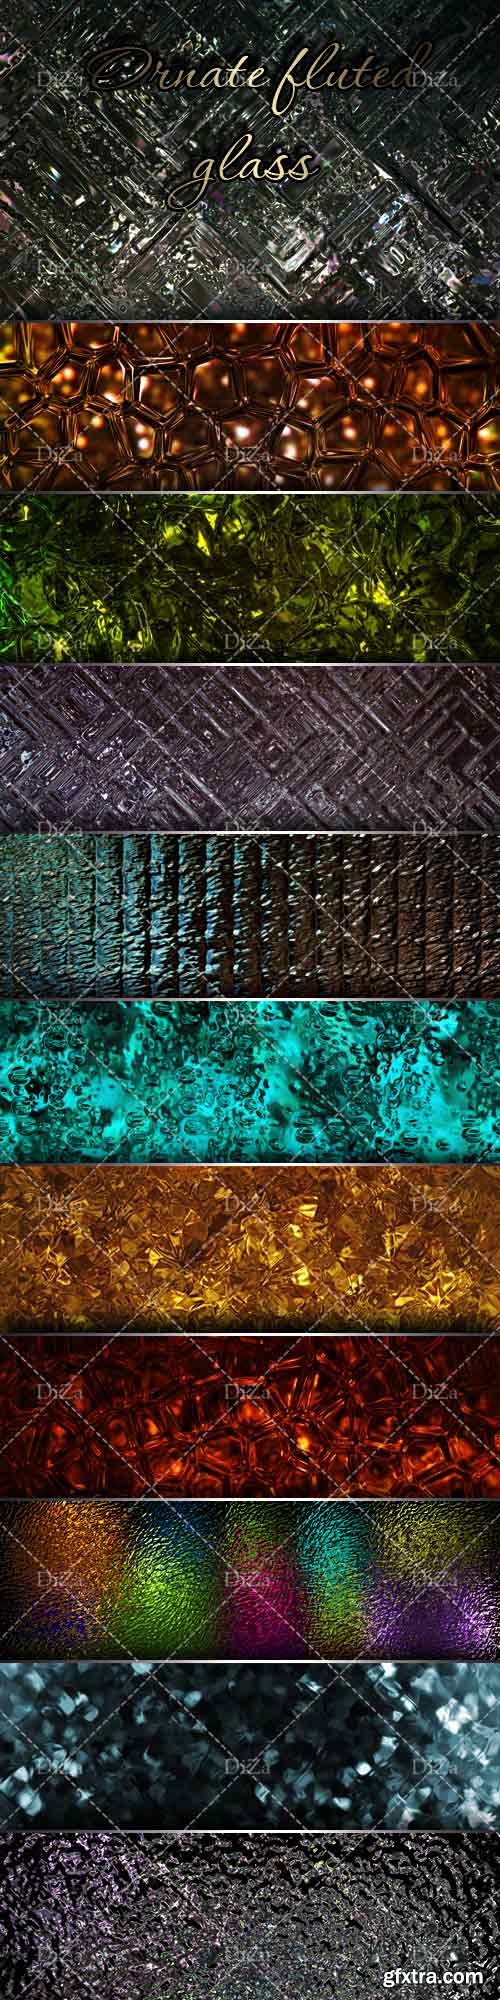 Ornate fluted glass textures